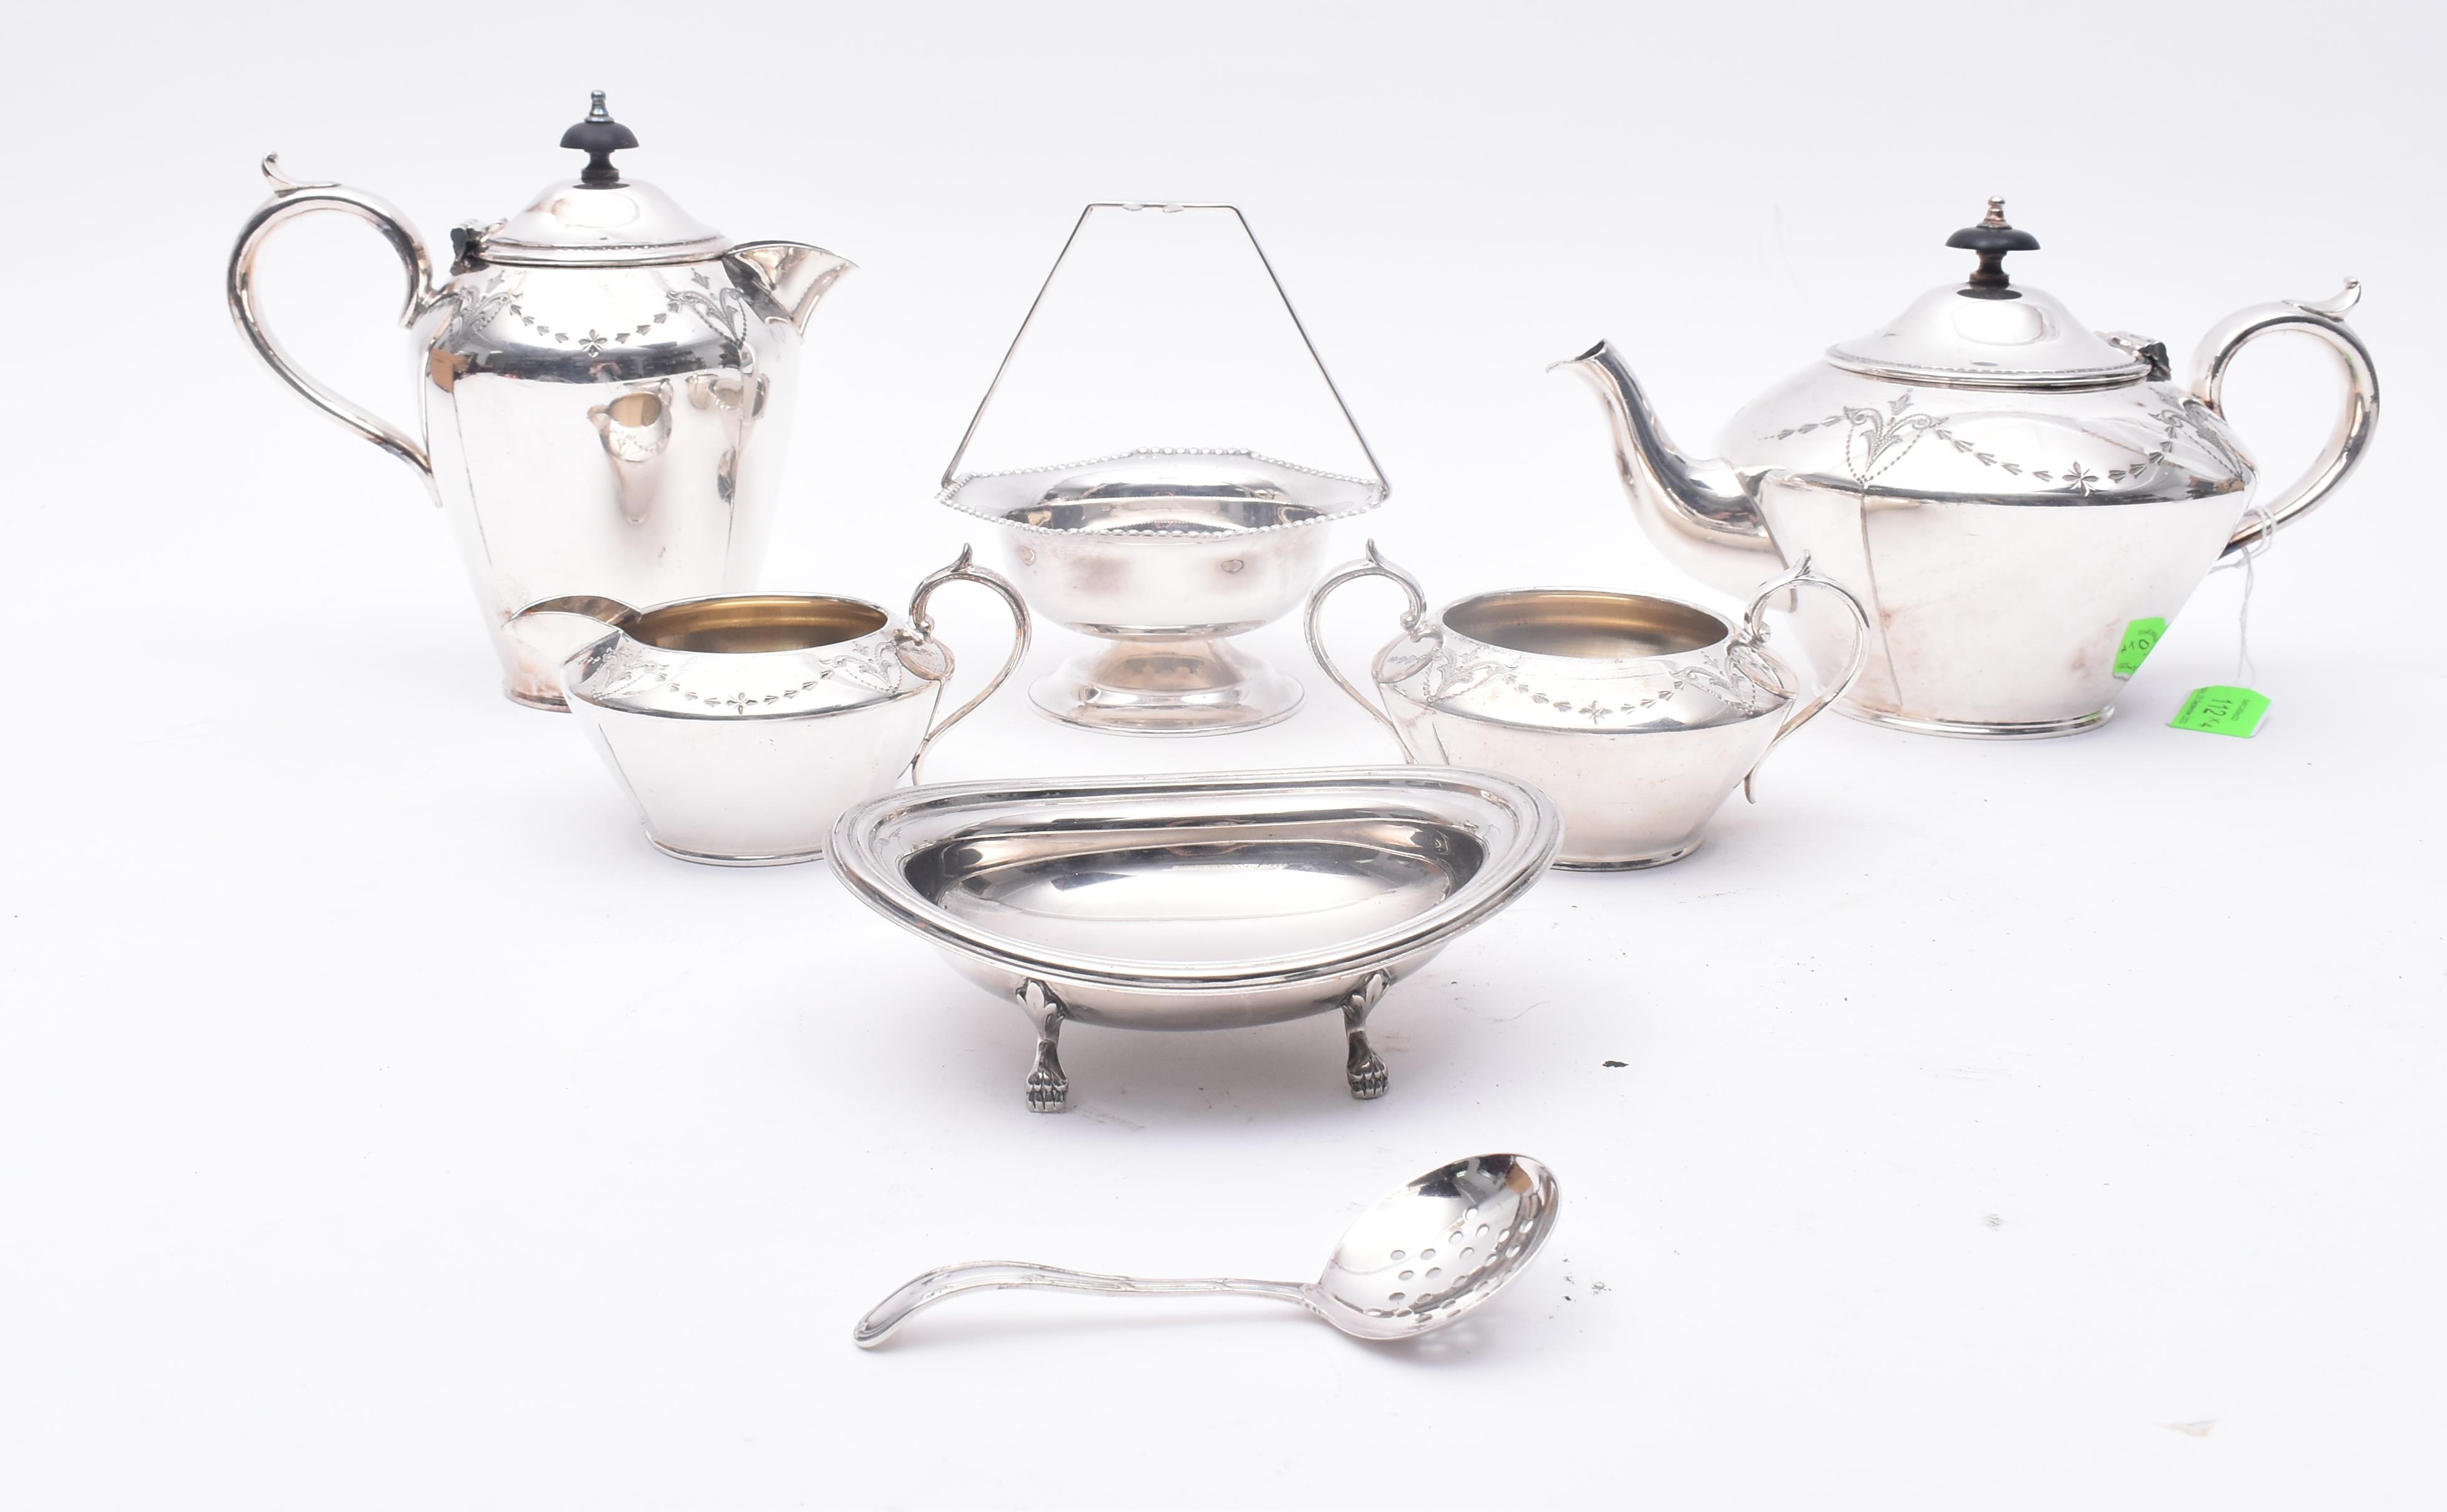 EARLY 20TH CENTURY SILVER PLATED TEA SERVICE WITH TEAPOT - Image 3 of 10